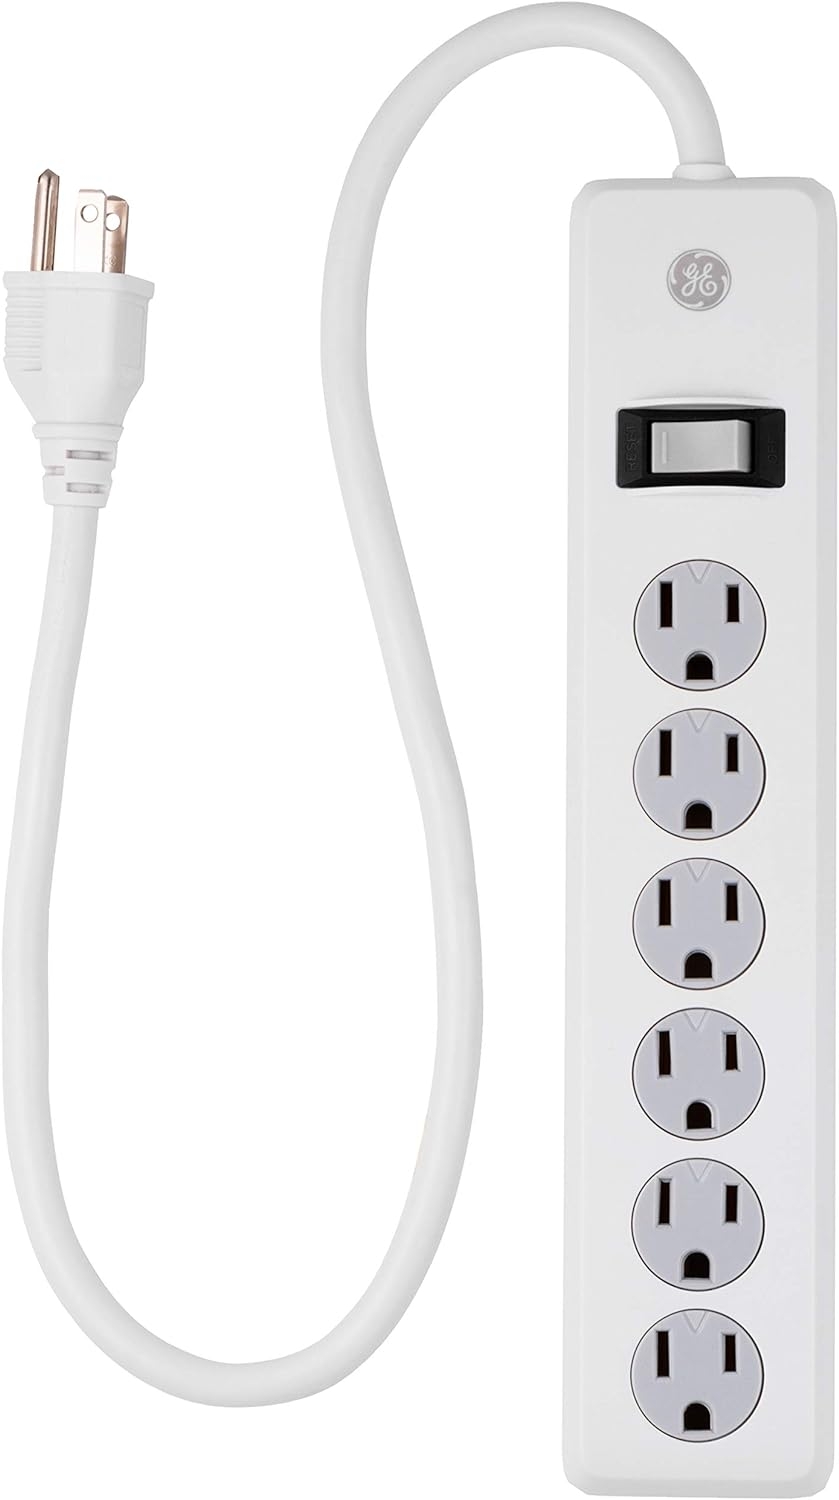 GE 14009-5 Power Strip Surge Protector, 6 Outlets, 2ft Power Cord, 450 Joules, Safety Locks, Multi Outlet, Wall Mount, White, 14009